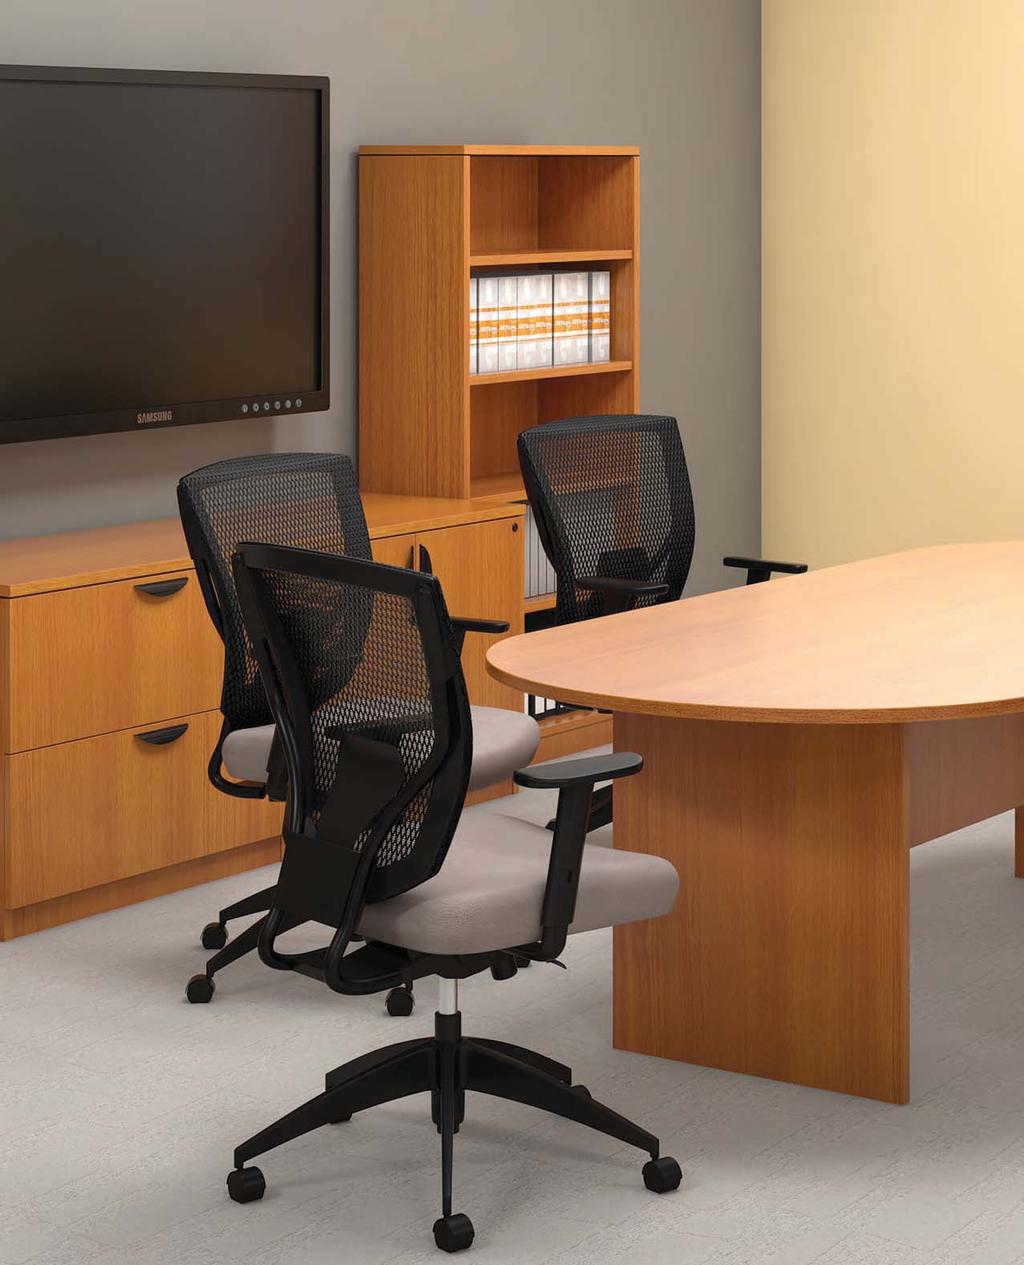 Affordable lobby furniture & Affordable office